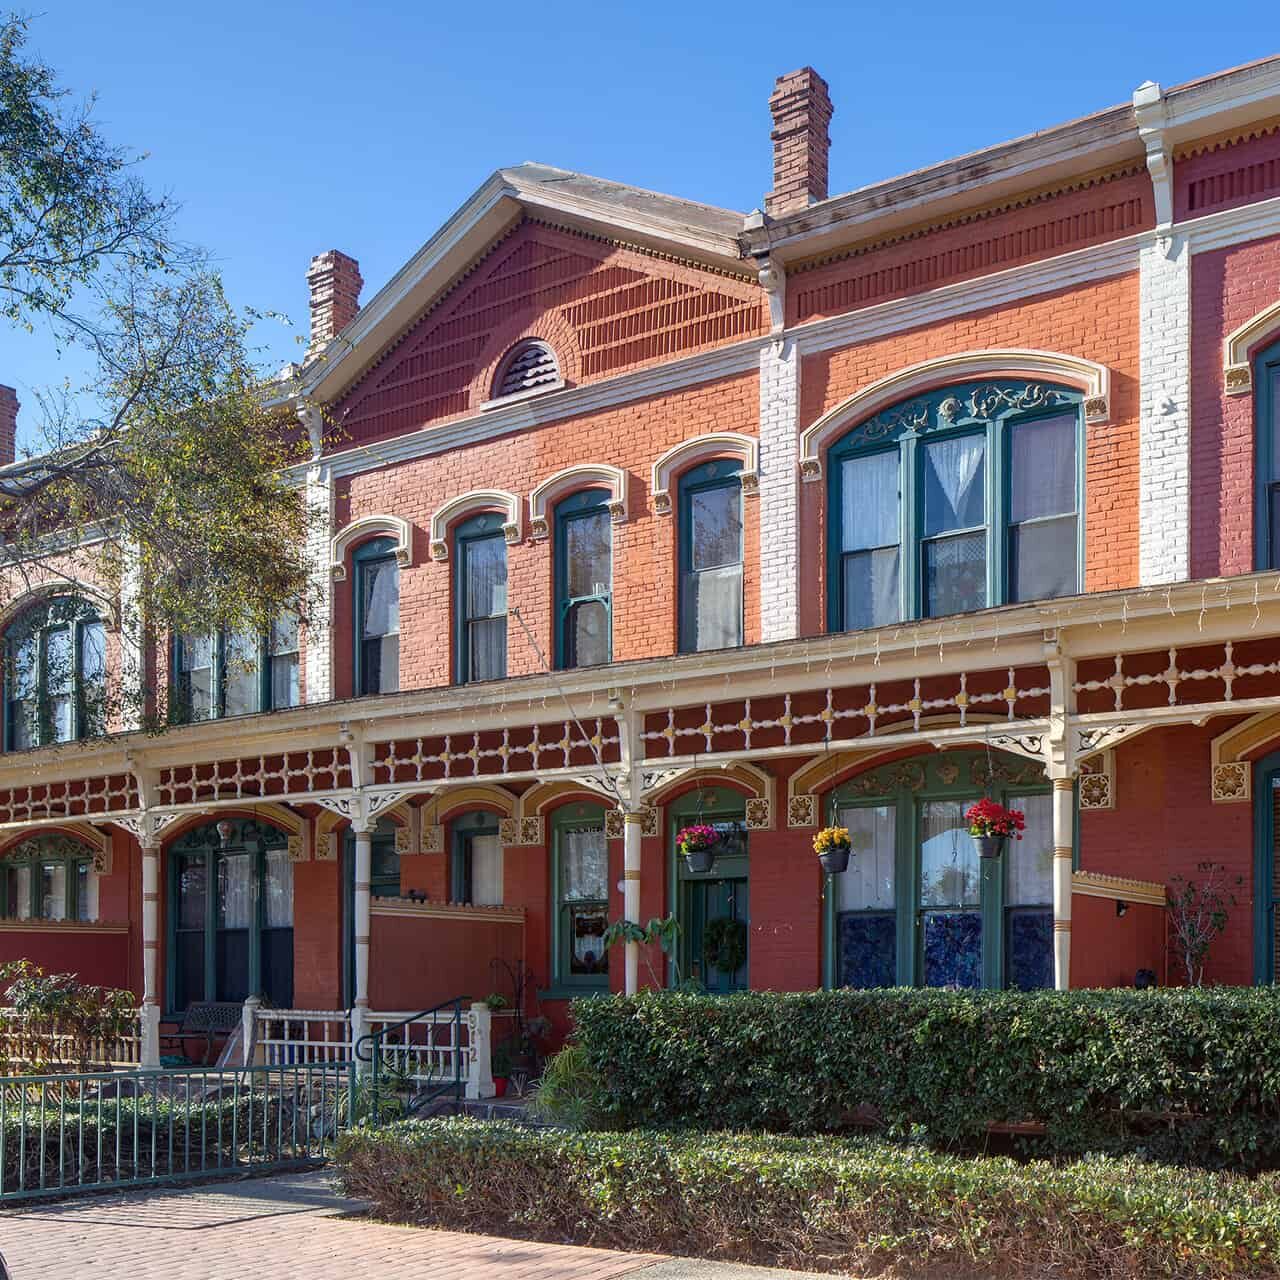 The exterior of a Victorian brick row house from the late 1800's in National City